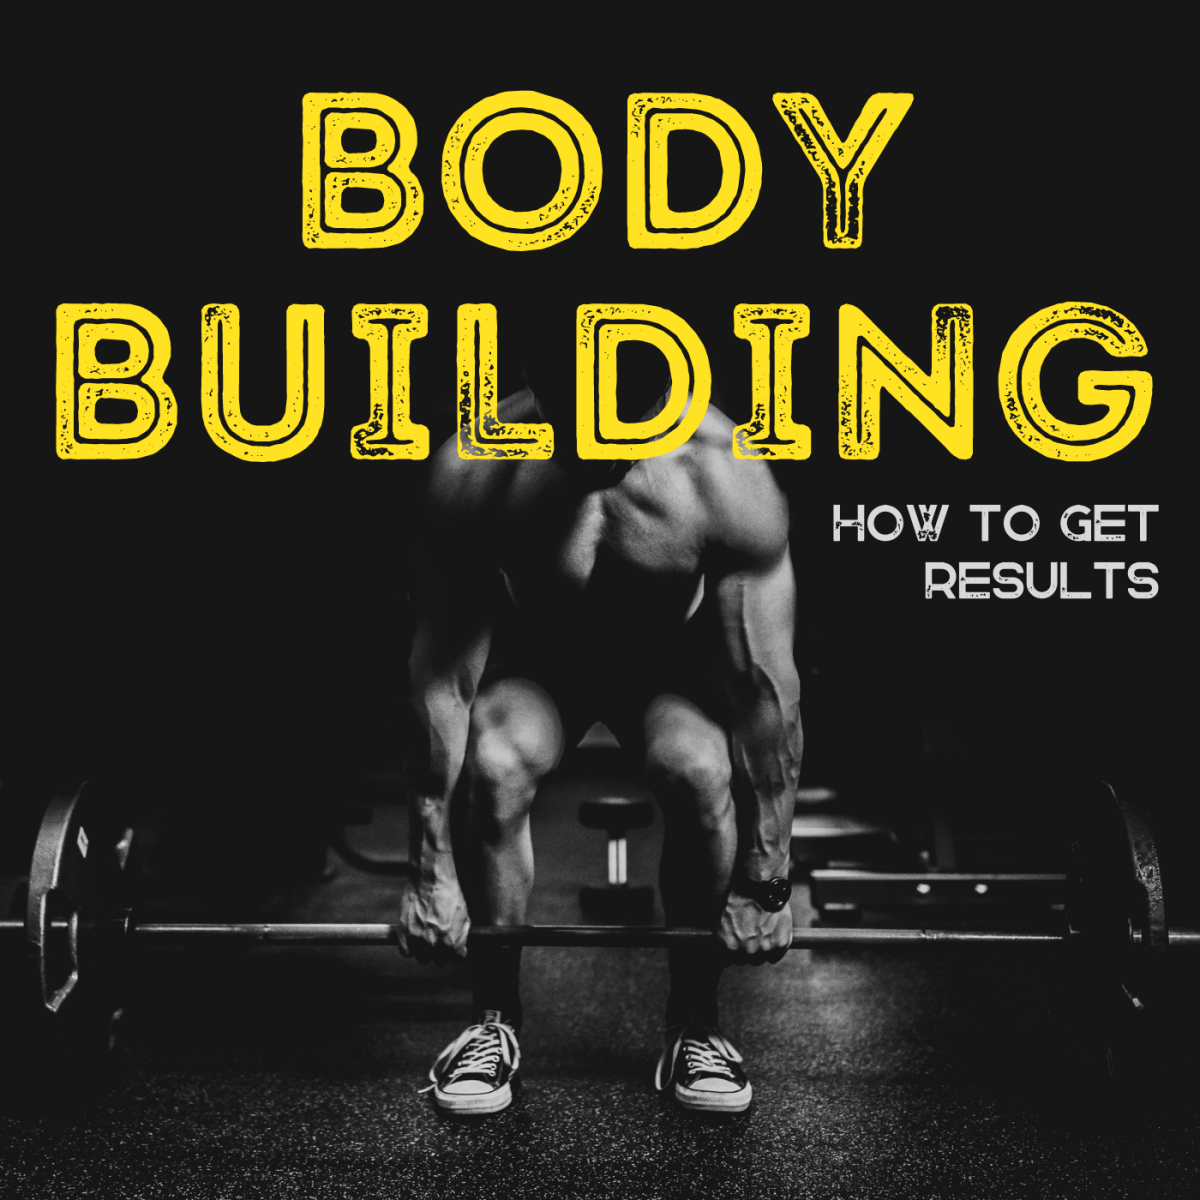 About Bodybuilding